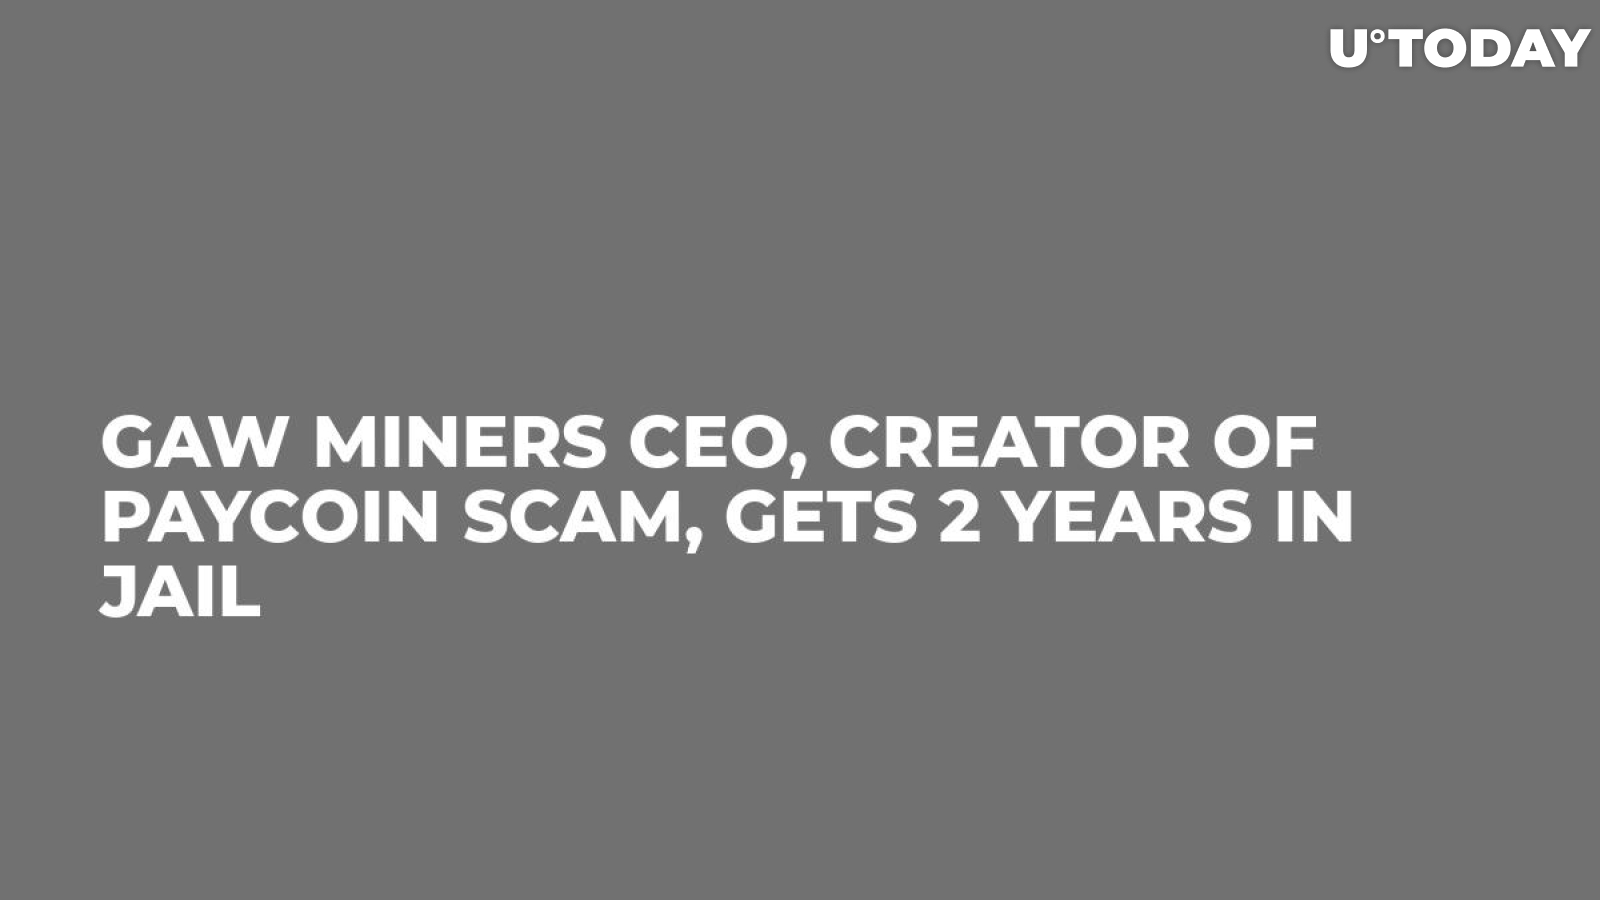 GAW Miners CEO, Creator of PayCoin Scam, Gets 2 Years in Jail